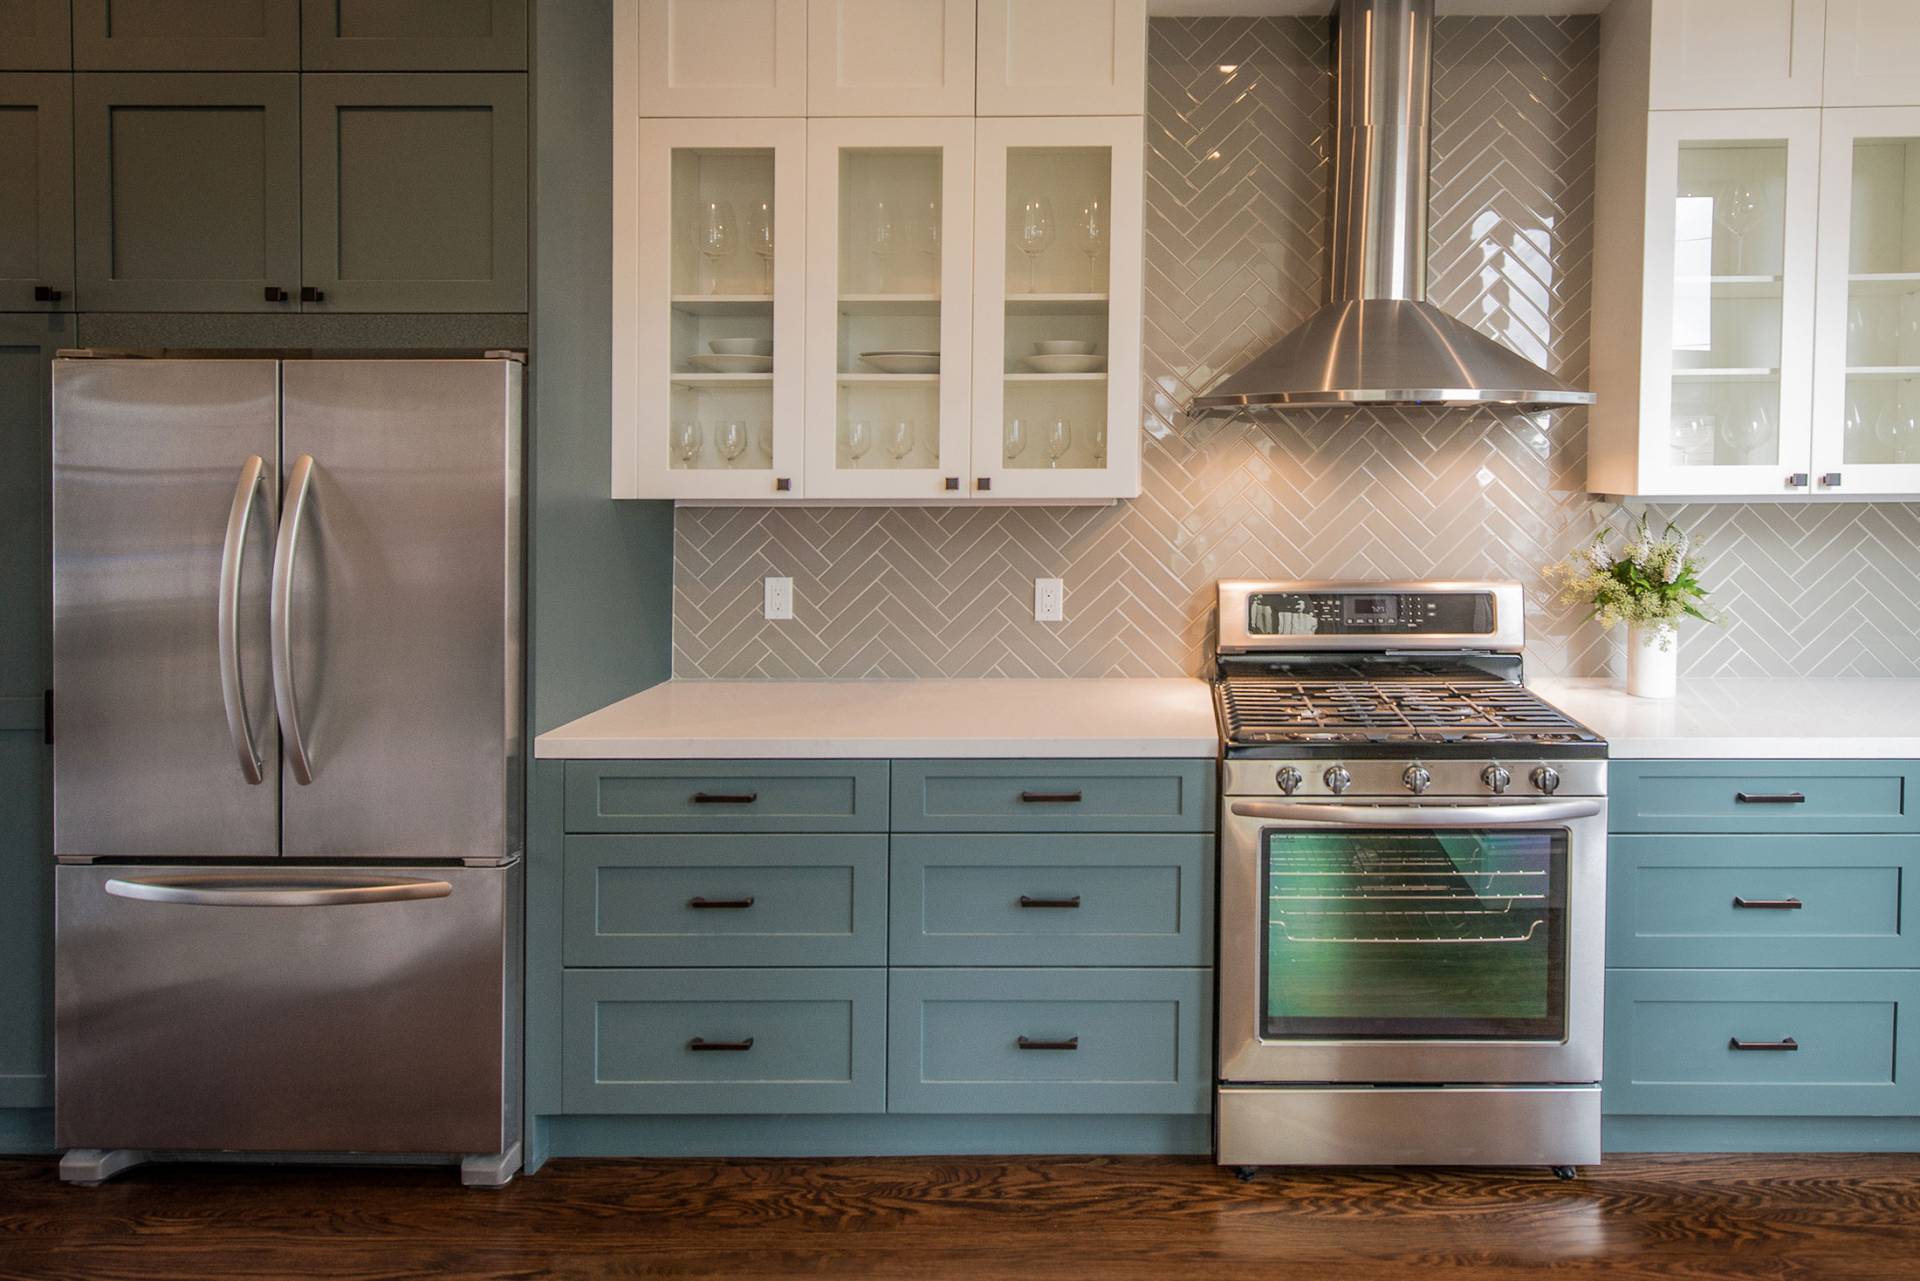 3 Kitchen Cabinet Colors that Are Big in 3 (& 3 that Aren